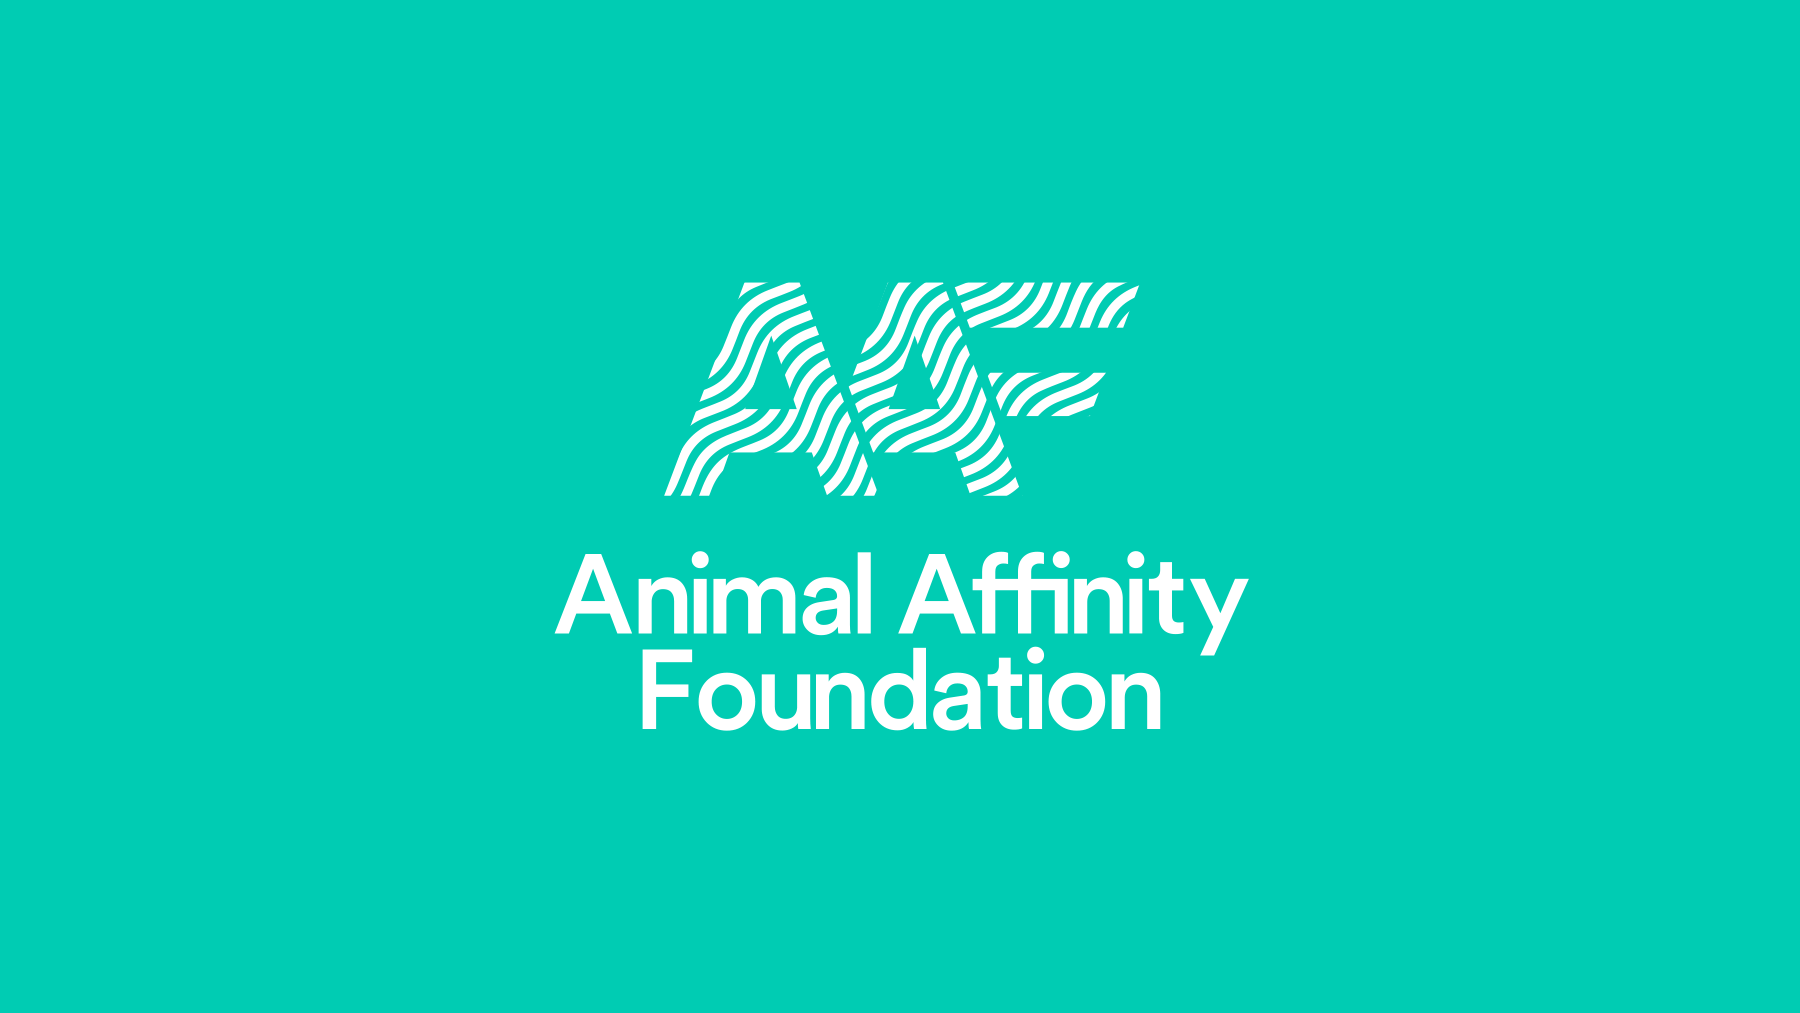 Animal Affinity's final striped brand identity design over a solid teal background.